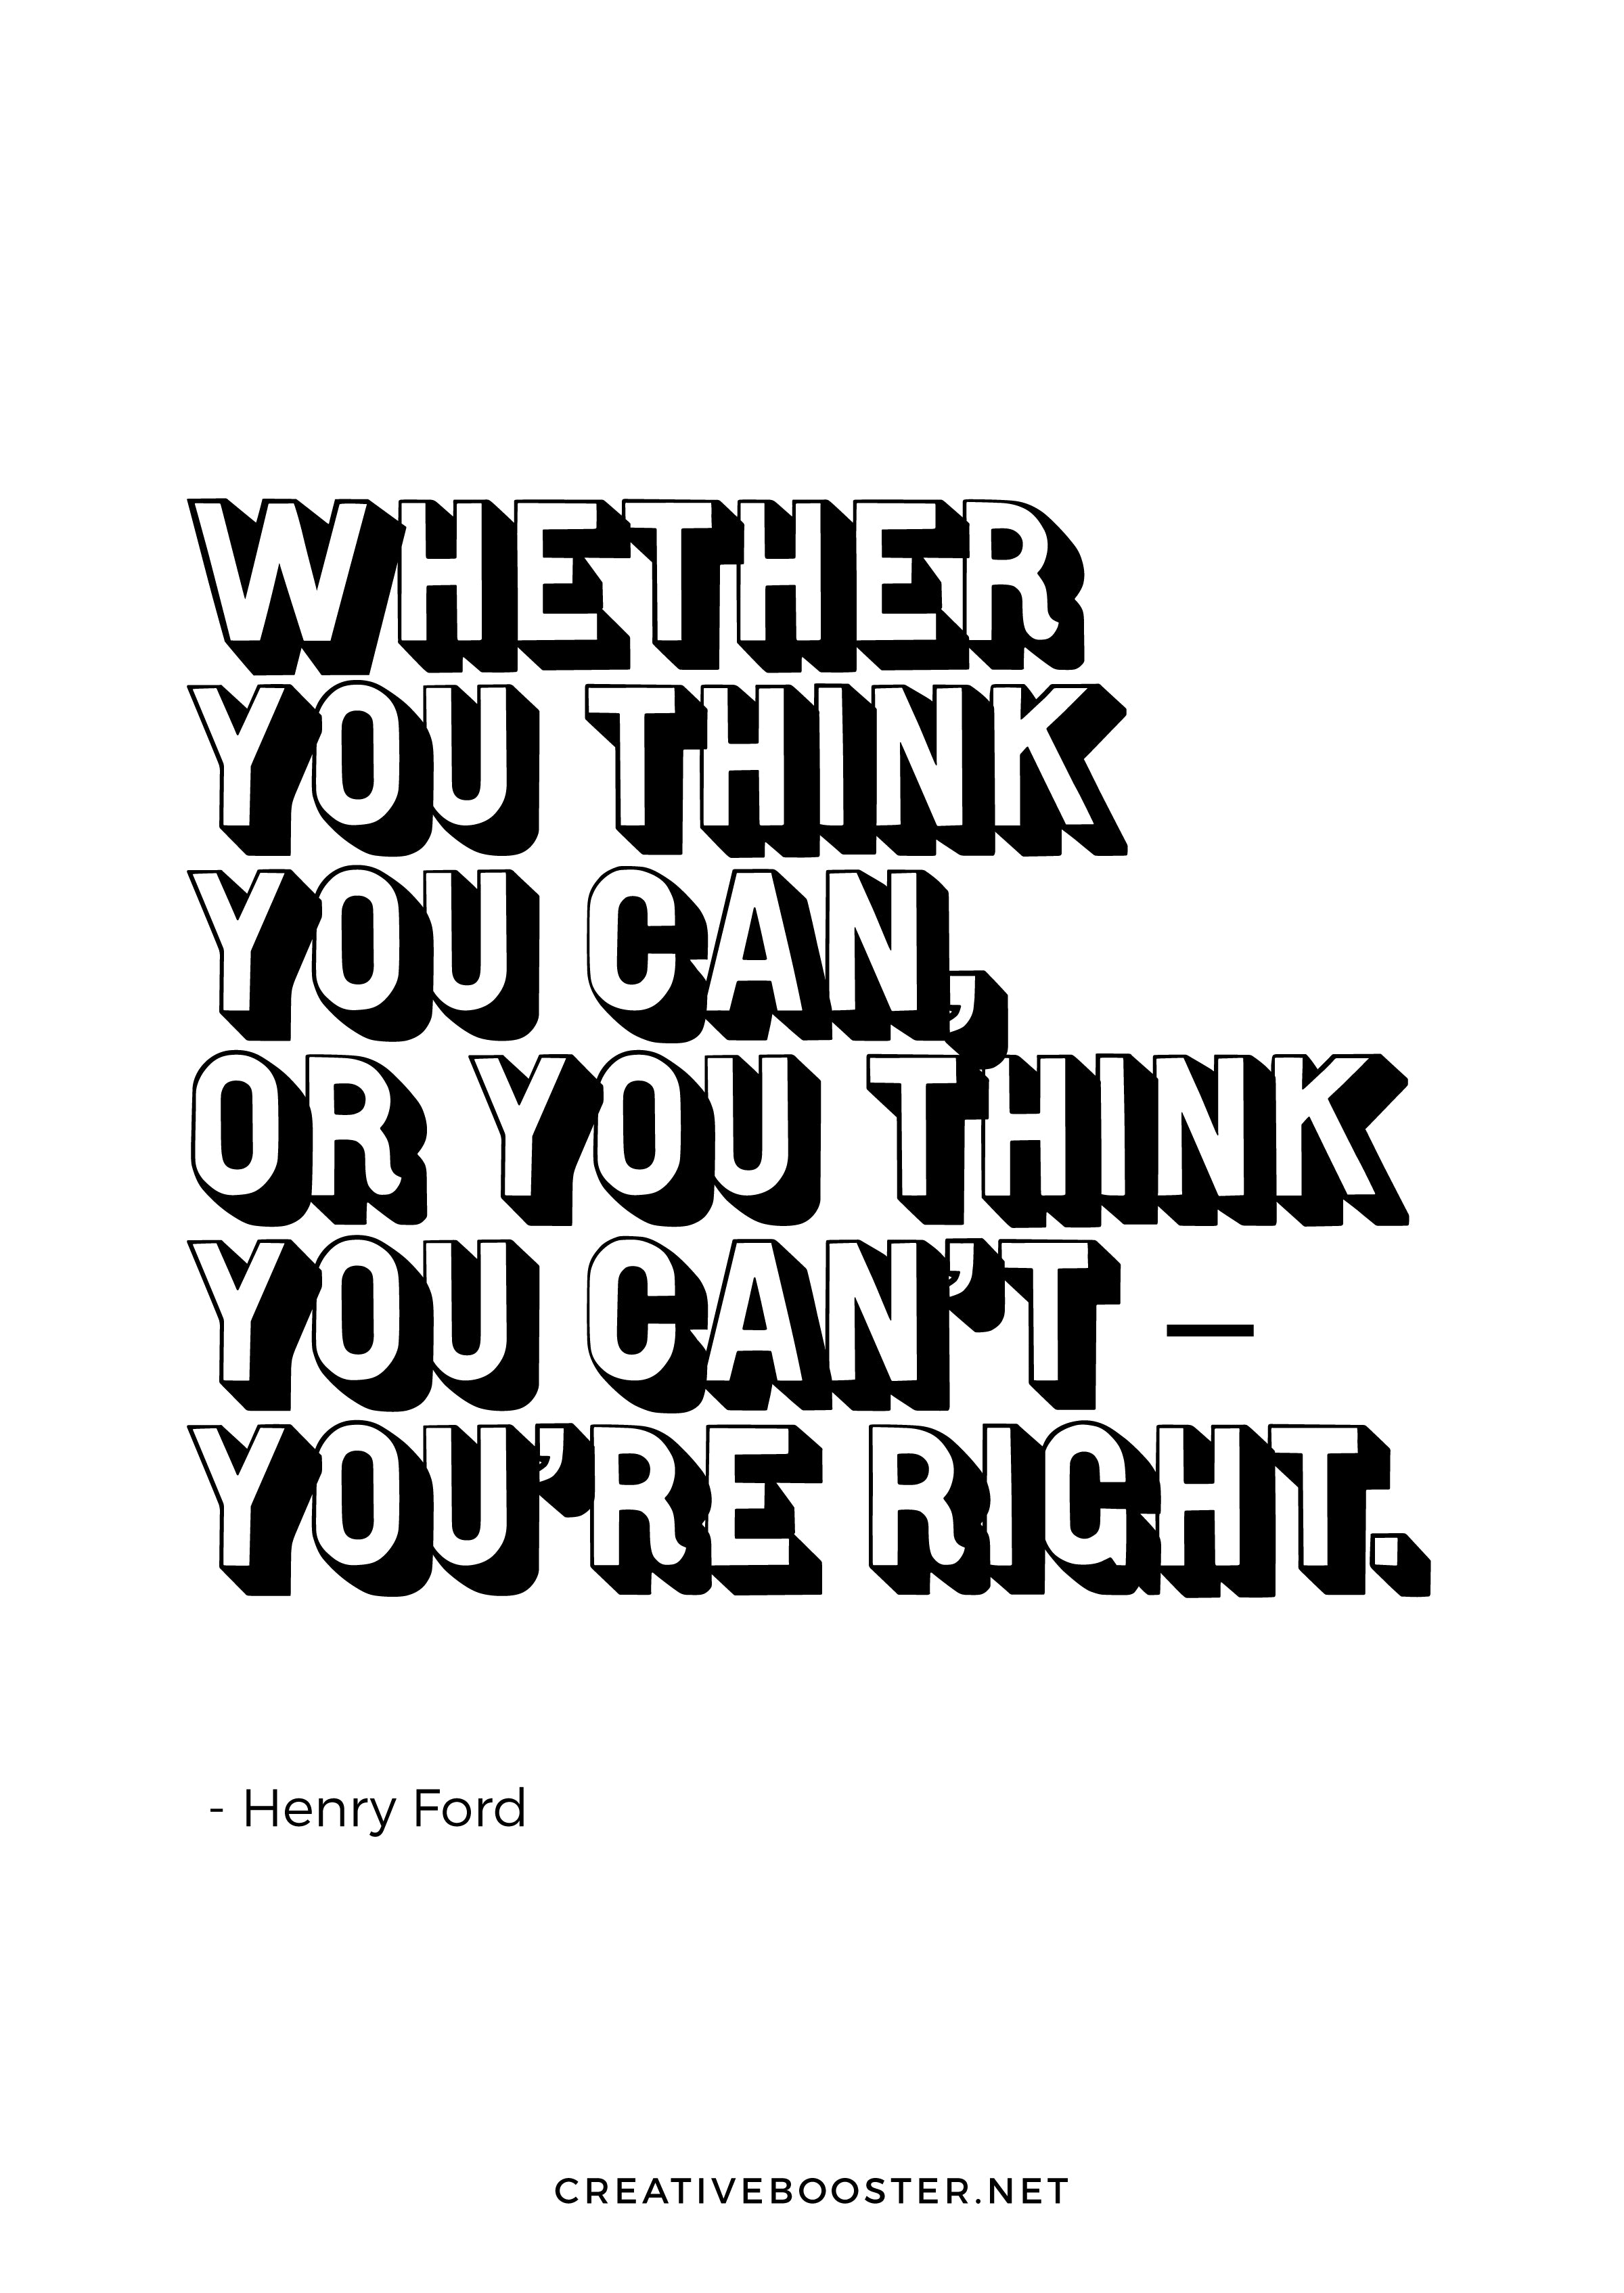 You-Got-This-Quotes-For-Students-“Whether you think you can, or you think you can't – you're right.” – Henry Ford (Quote Art Print)